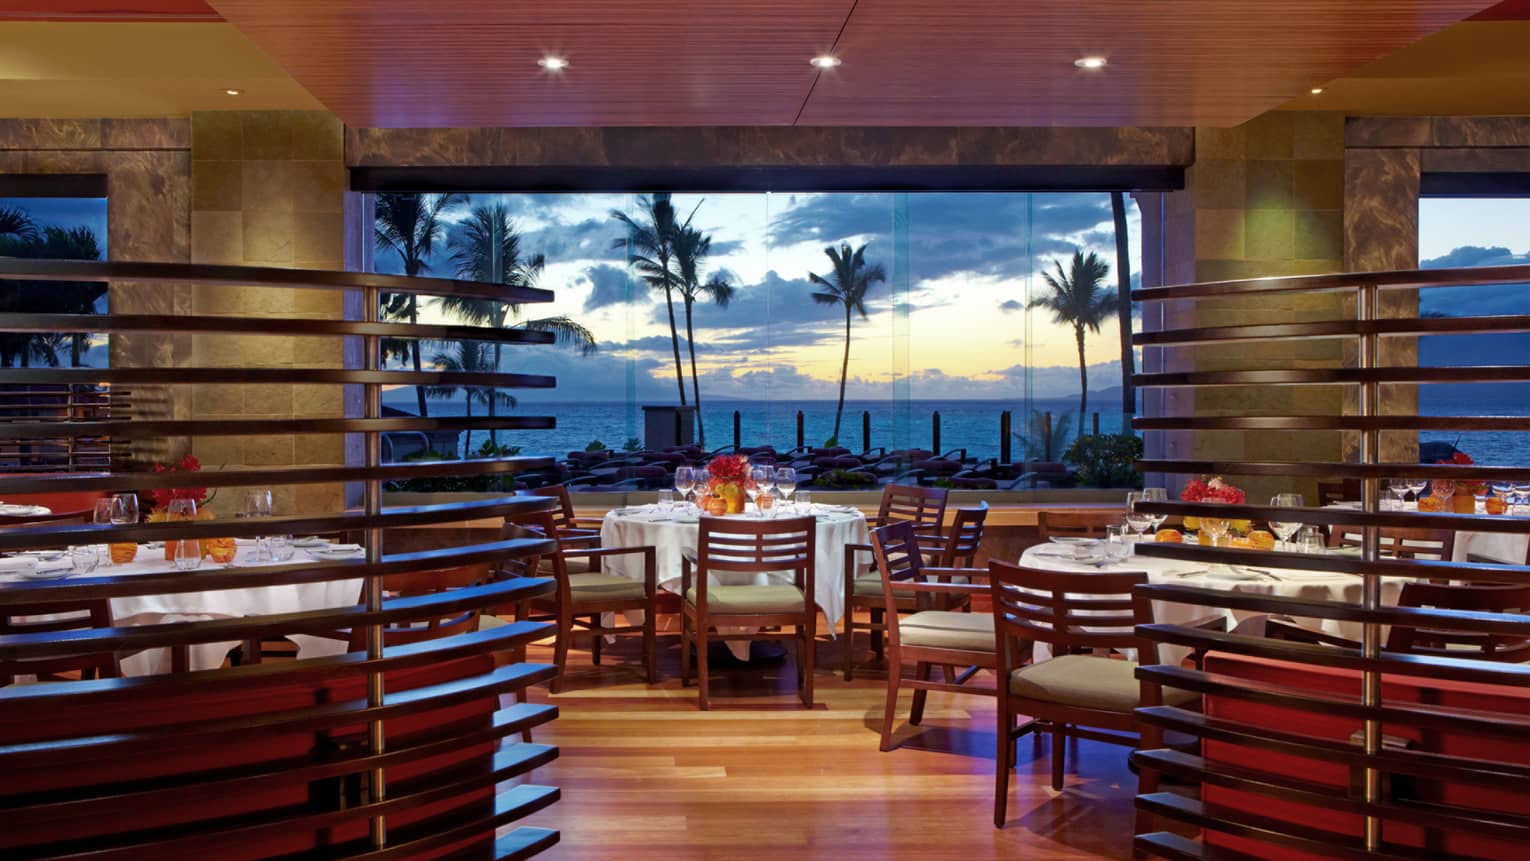 Spago dining room with wood decor, floor-to-ceiling windows looking out at palm trees, oceans and sunset